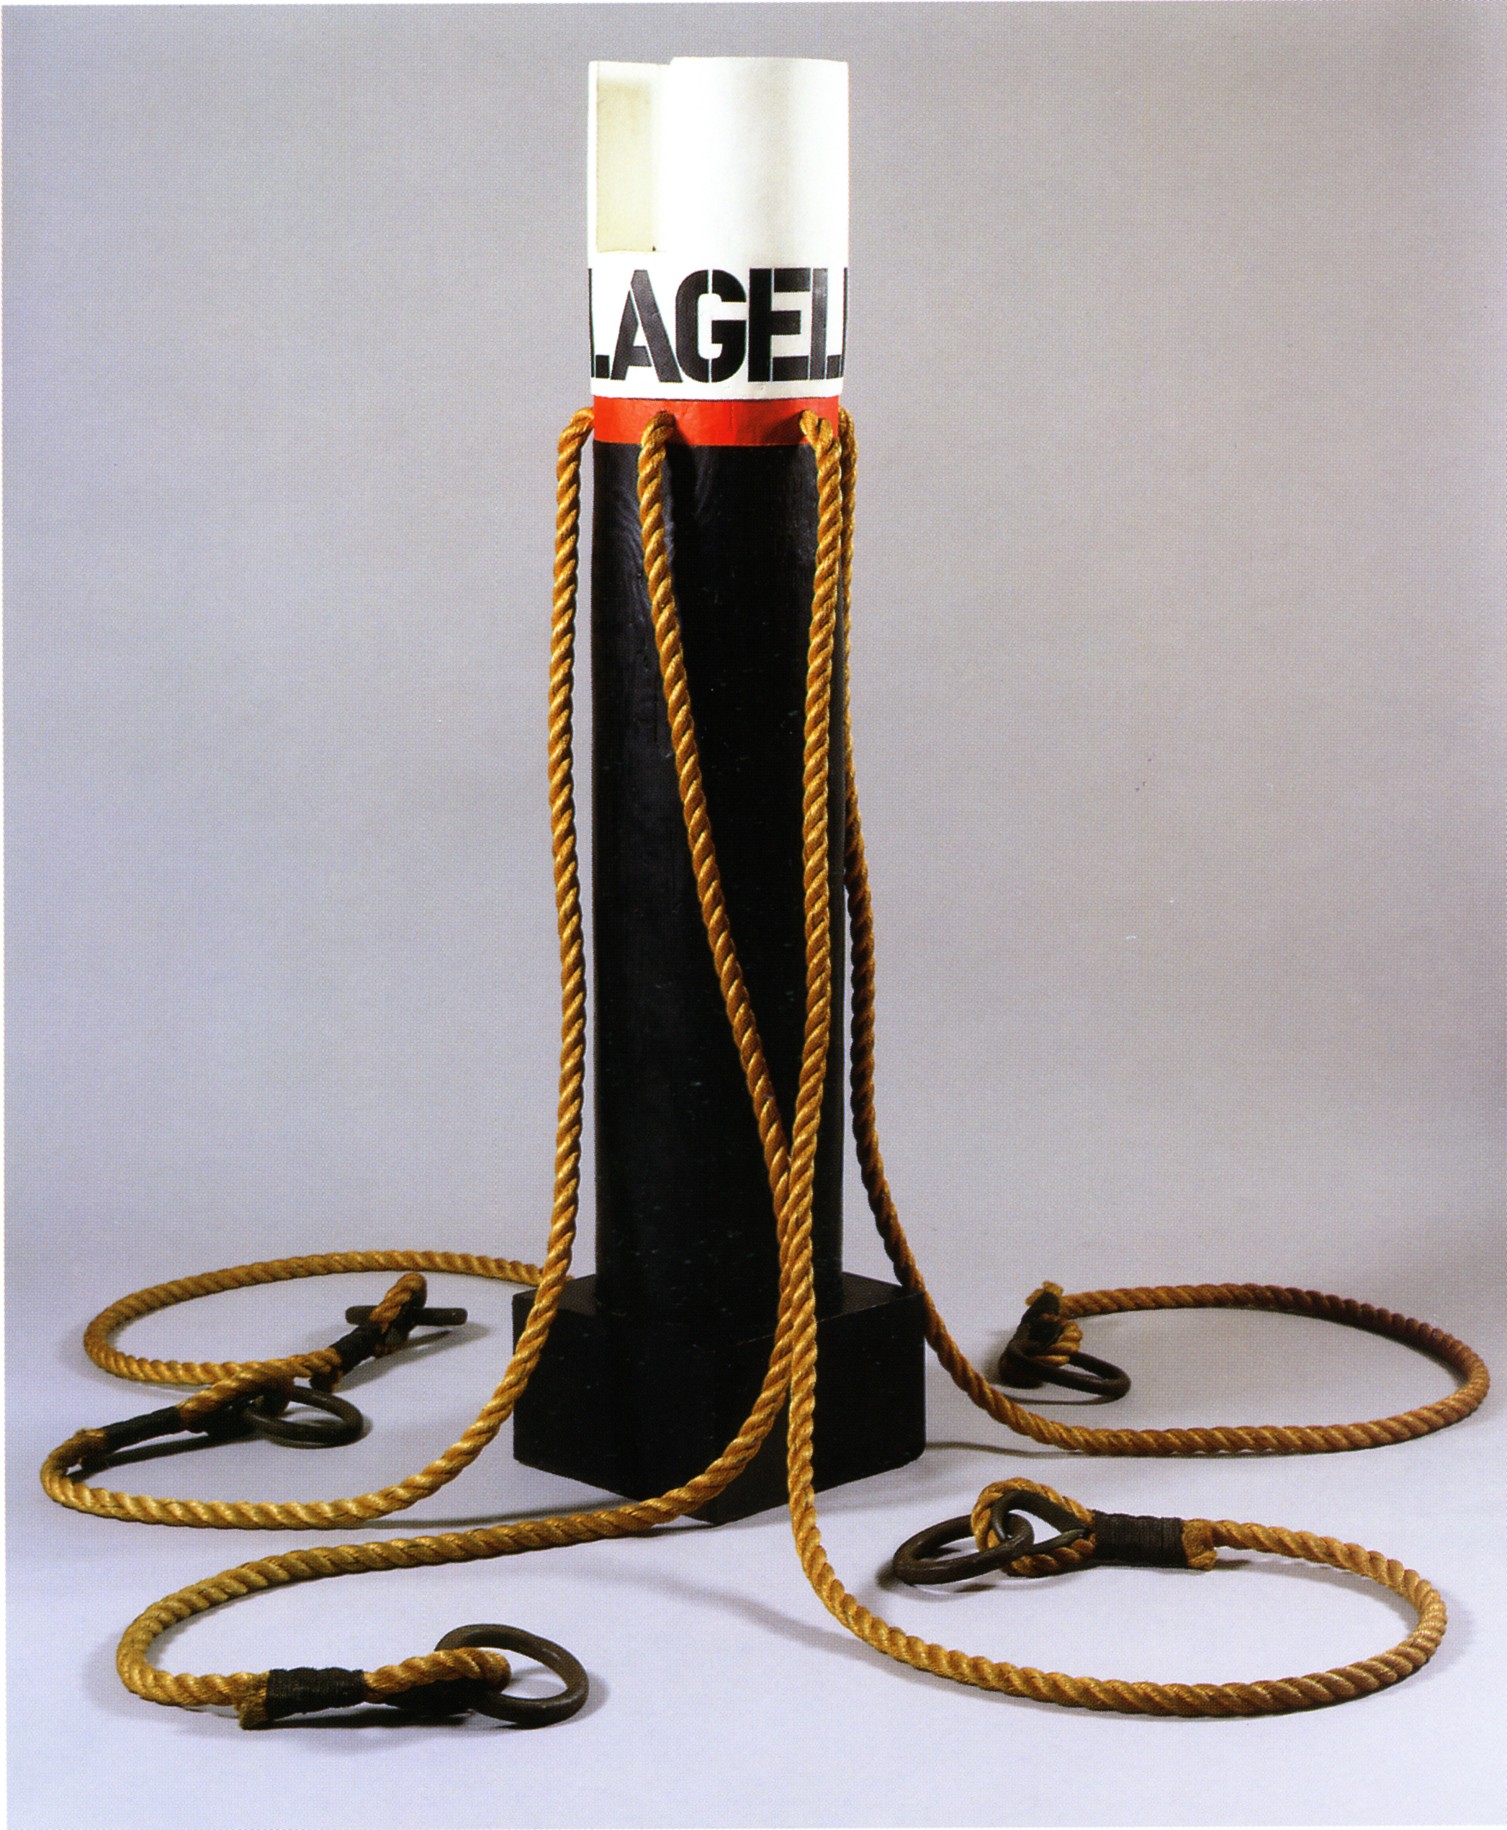 A 63 1/3 inch high wooden column on a wooden base. The top of the column has been painted white, with the work's title, Flagellant, painted in black stenciled letters. Below the title is a red band, where four long ropes with shackles have been attached to the work.